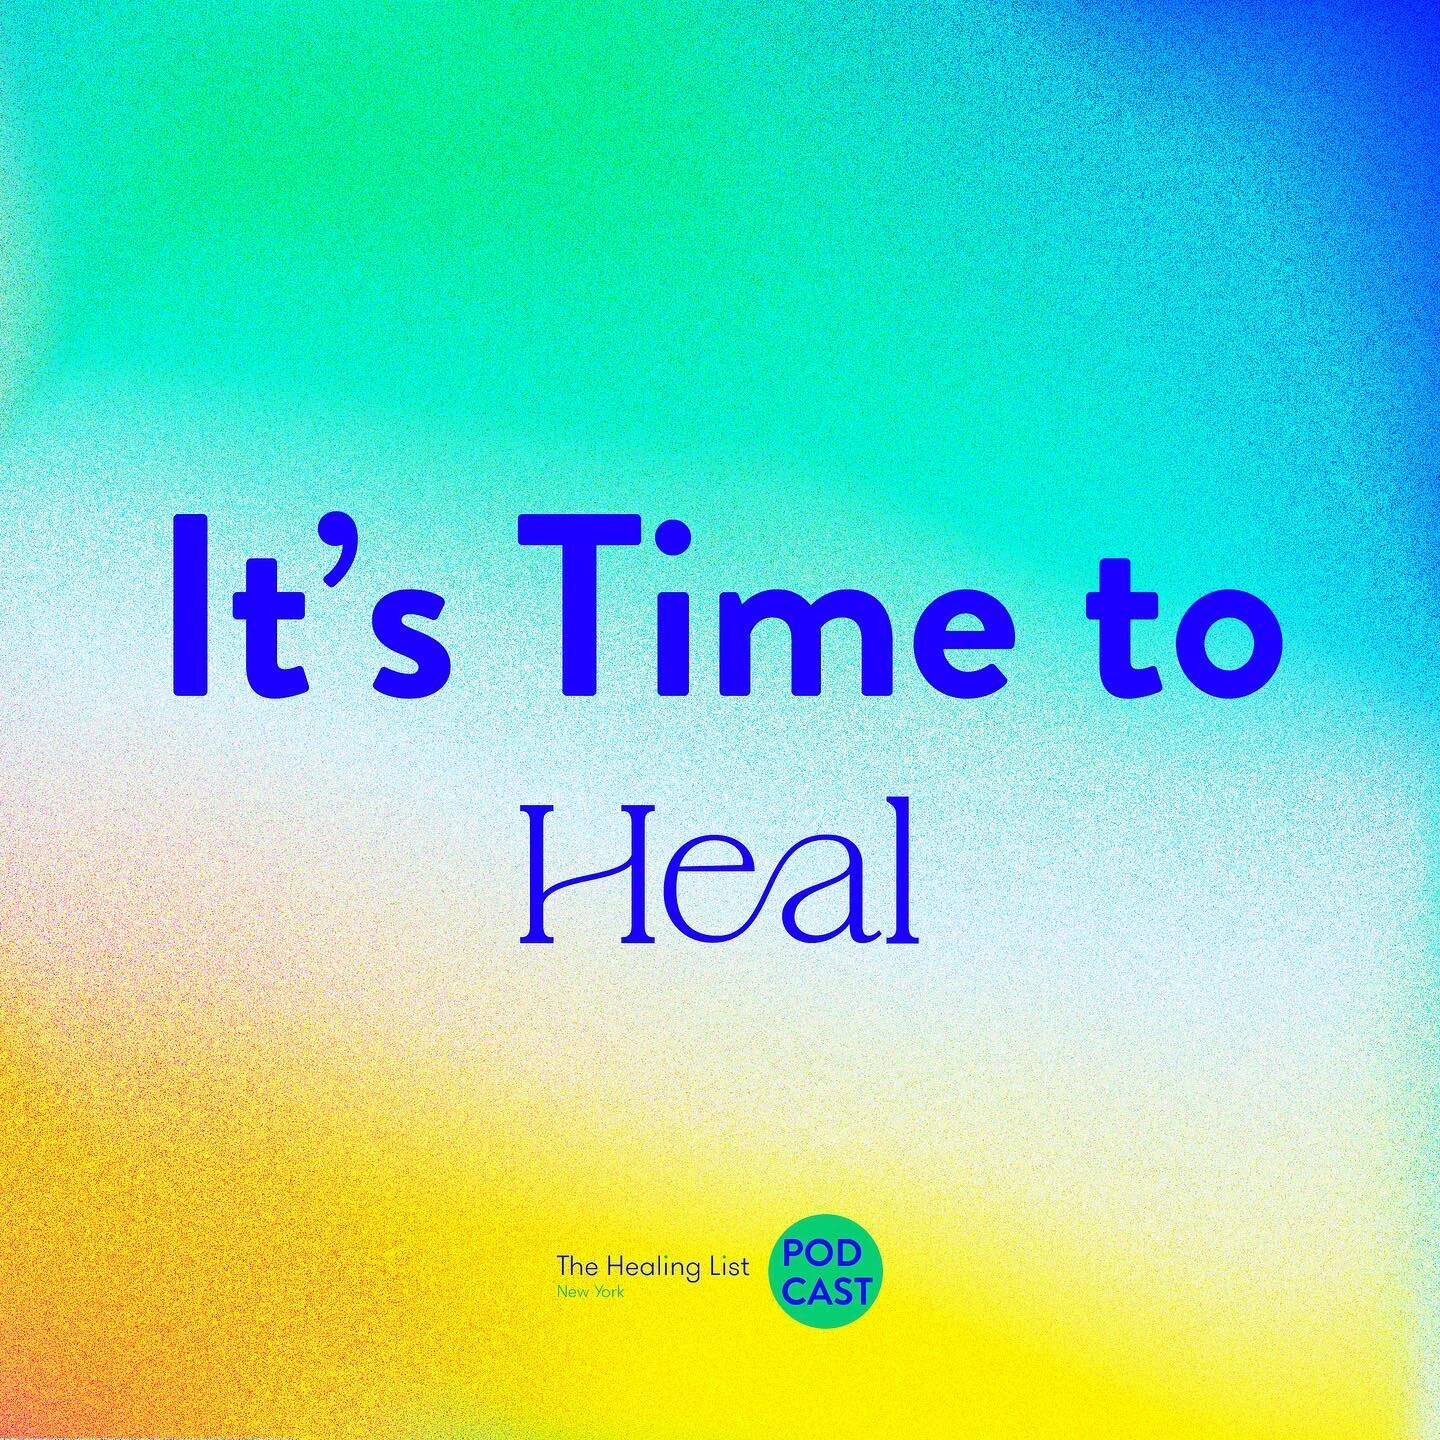 ⏰ It's Time to Start! 

The Healing List newest season is about focusing on YOU and your Healing Journey.✨

Please share with us which &ldquo;It&rsquo;s Time to&rdquo; resonate with you the most. 🙌
*
*
Listen now to all episodes available on @spotif